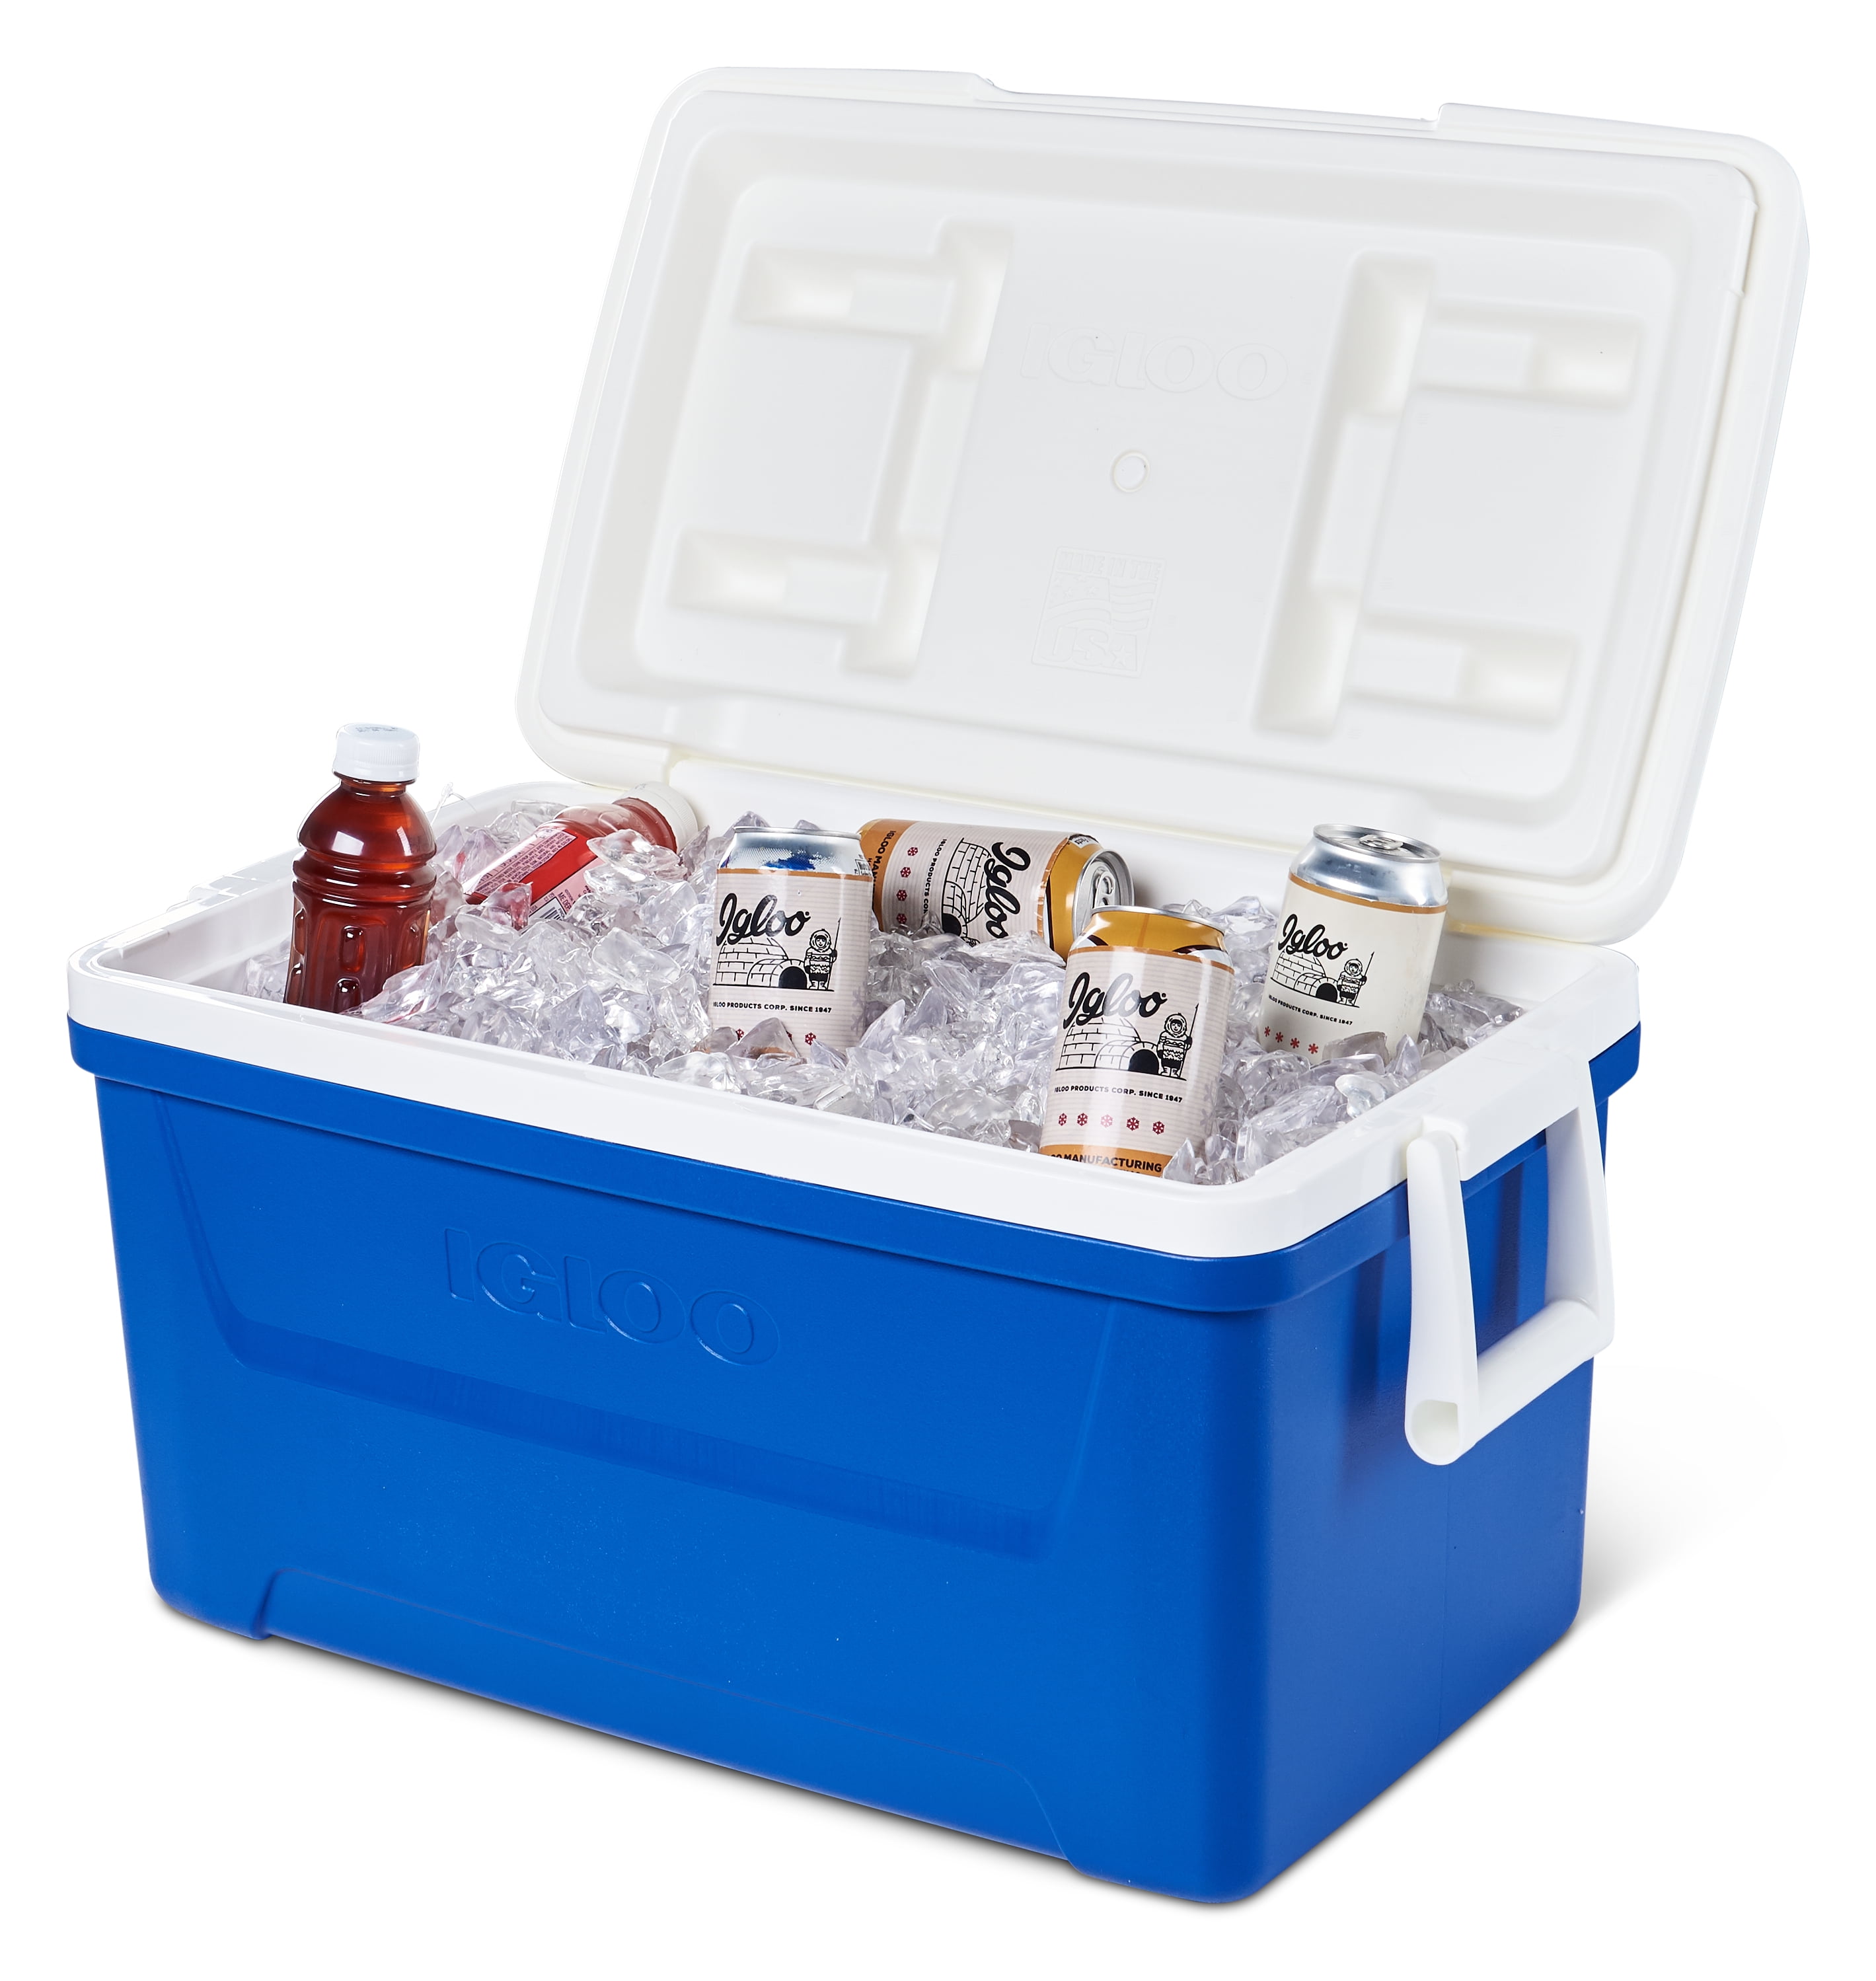 Details about   NEW 48 Quart Laguna Ice Chest Cooler With Swing Up Carry Handle 45 Liters Blue 